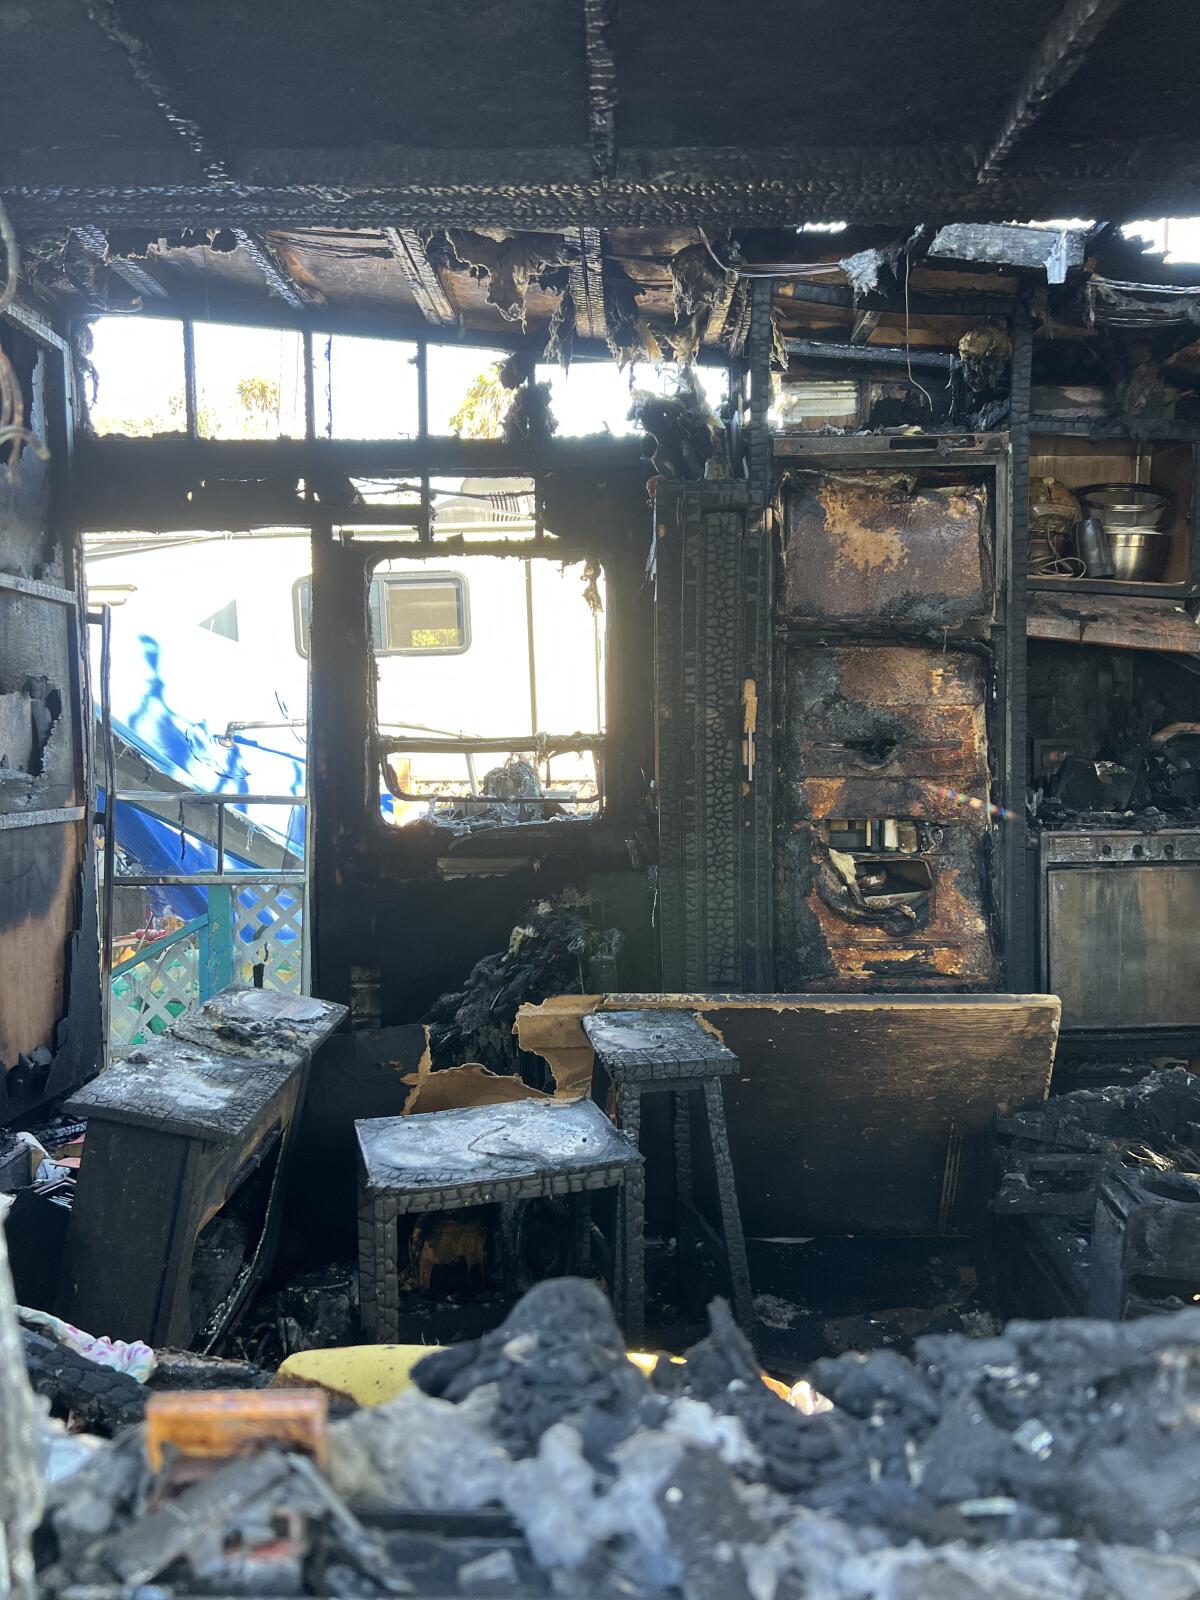 More of the interior damage that made the trailer completely uninhabitable for Michelle Martin and her mother, Lynn.